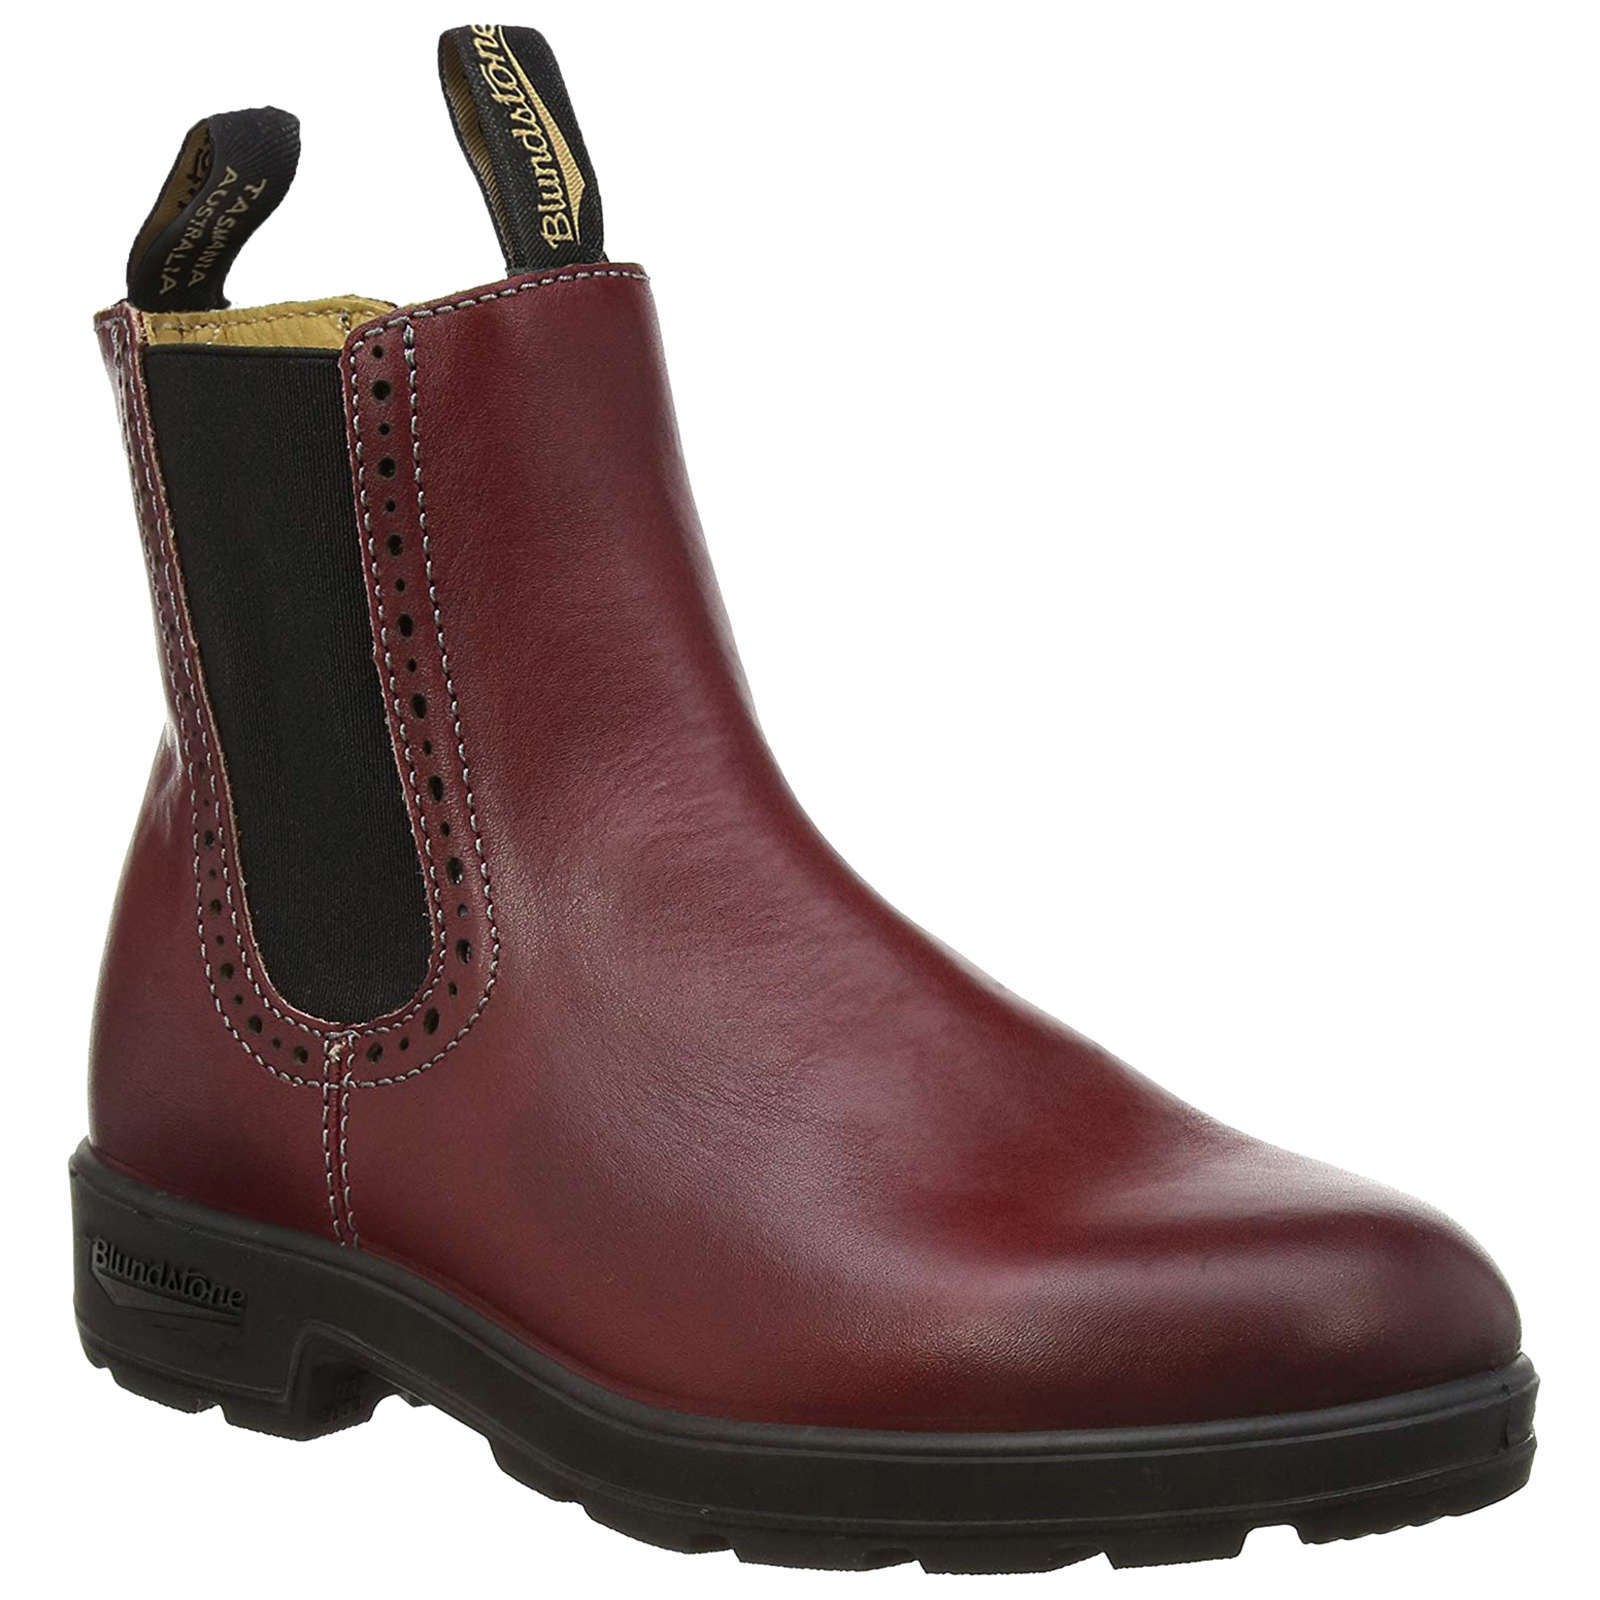 Blundstone 1443 Water-Resistant Leather Unisex Chelsea Boots#color_burgundy rub